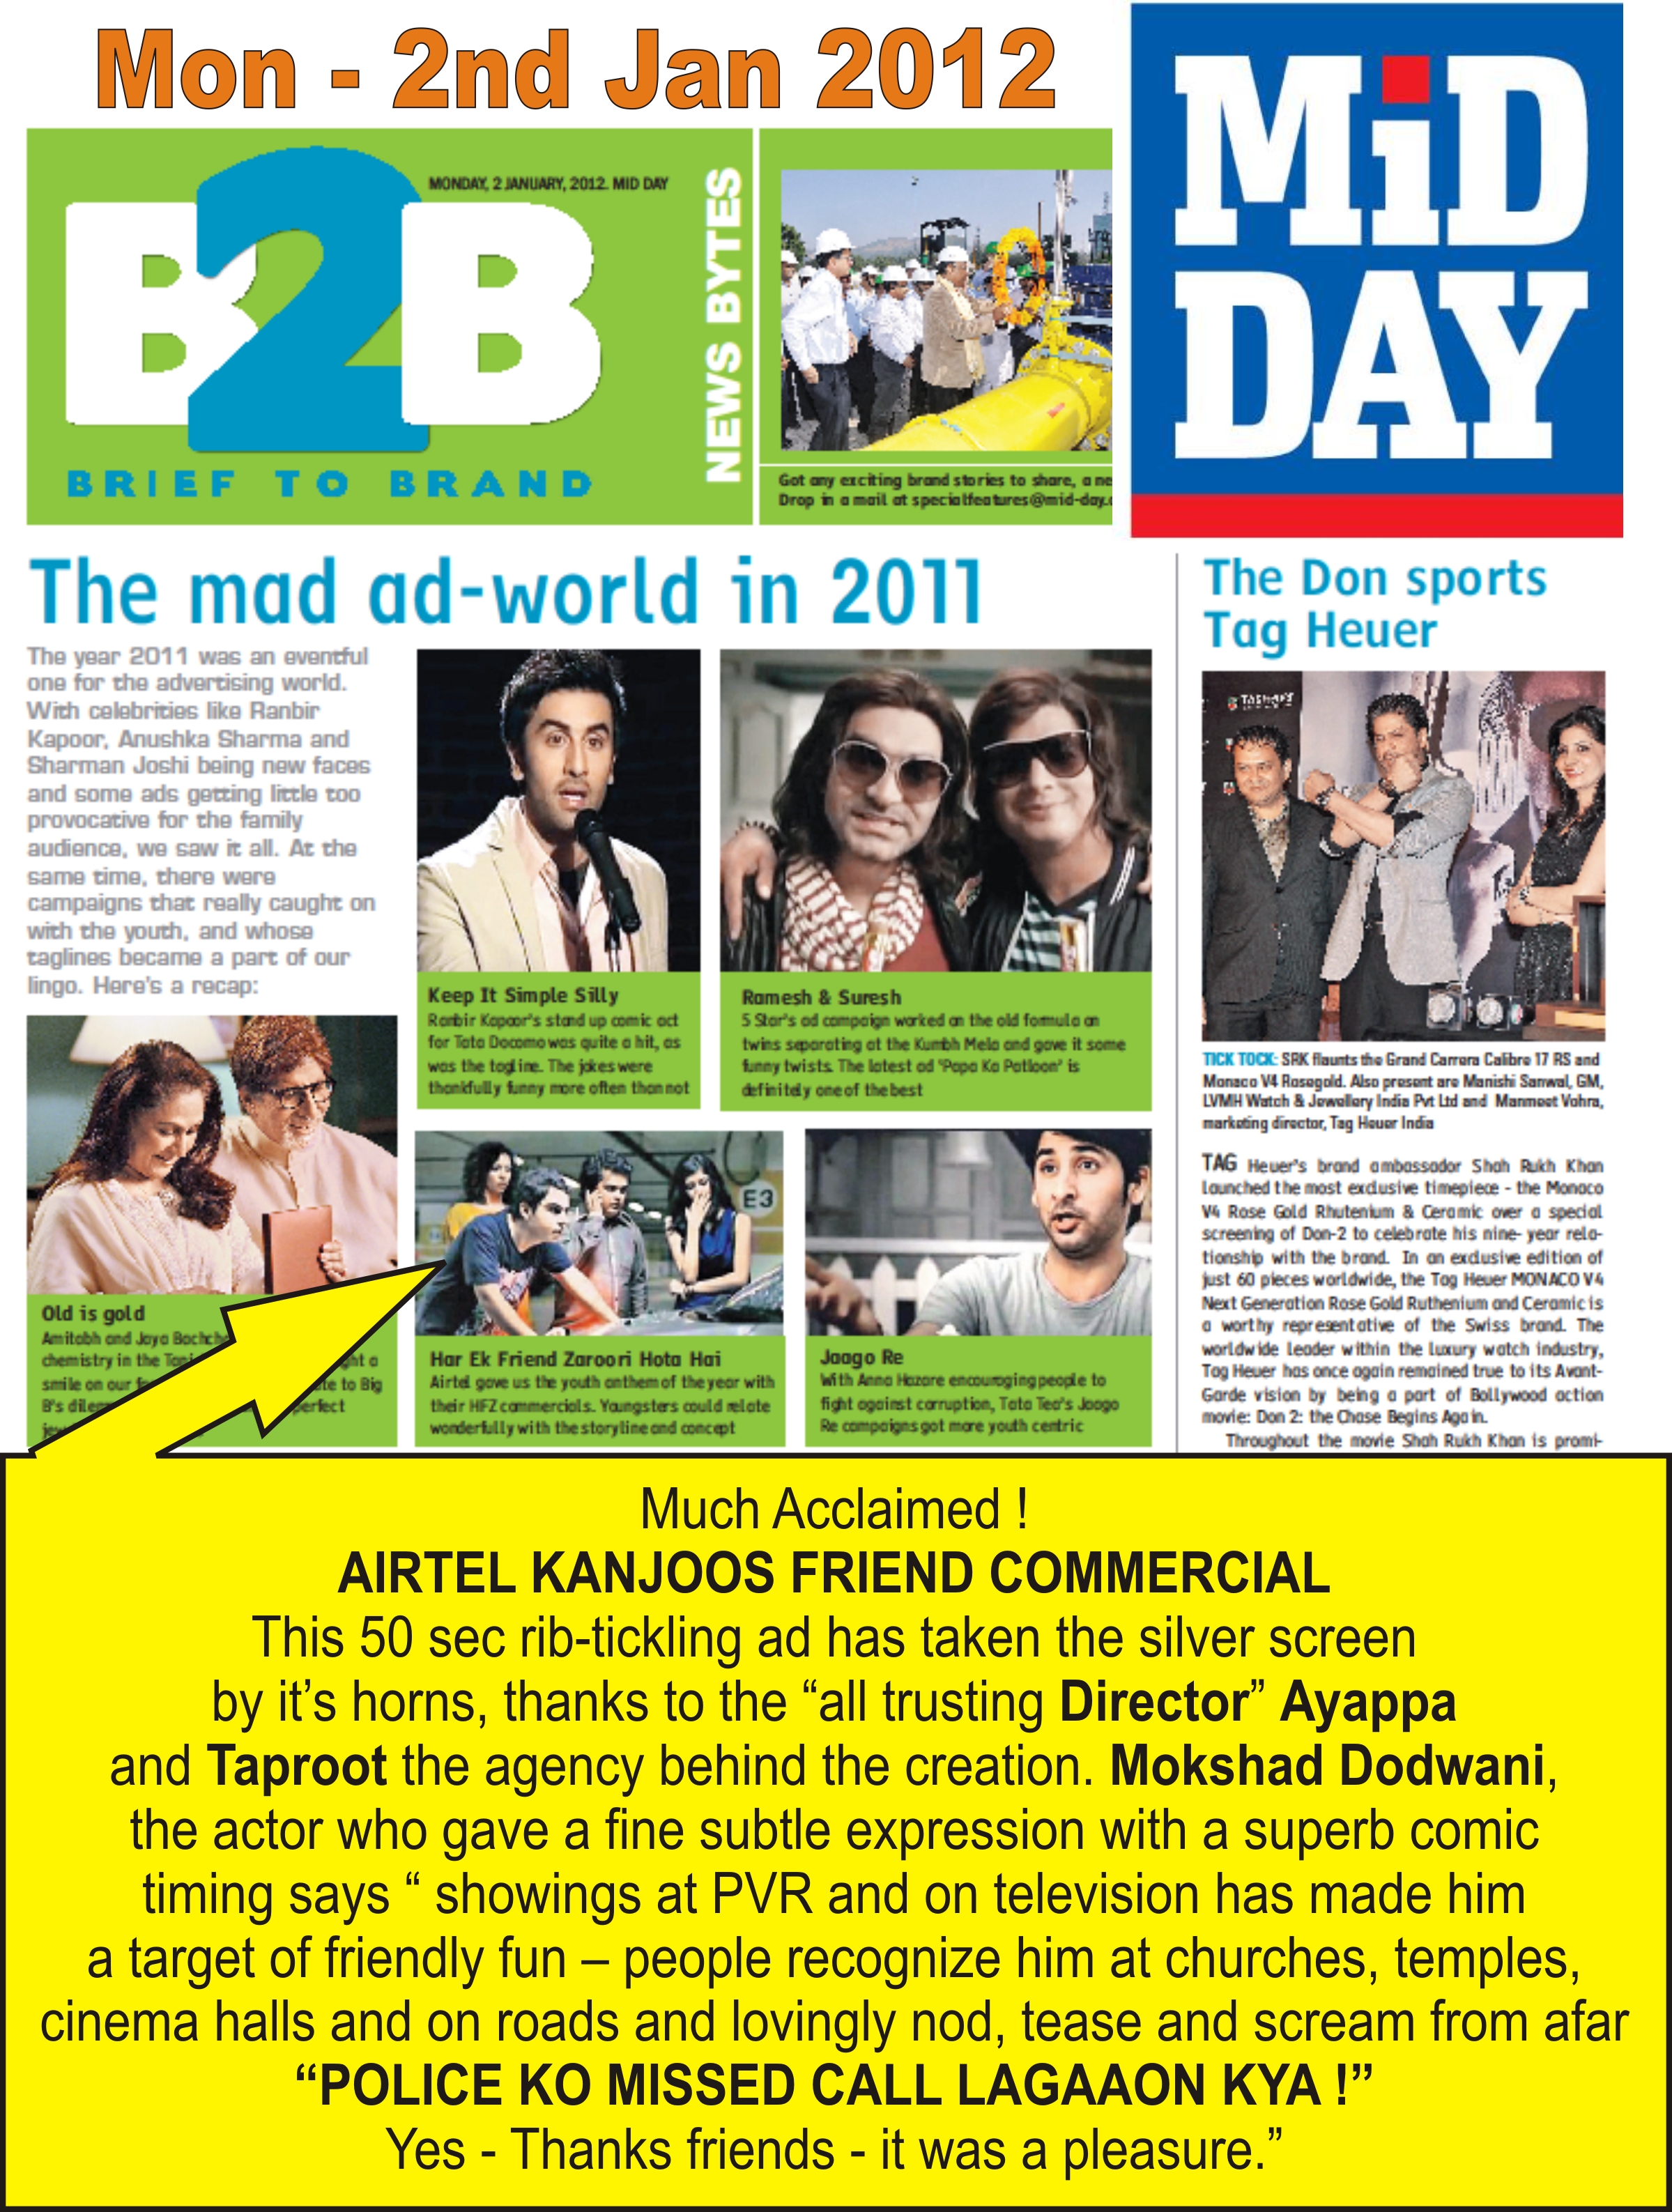 MIDDAY ACCLAIMS AIRTEL KANJOOS FRIEND COMMERCIAL AS ONE OF THE LEADING COMMERCIALS OF 2011